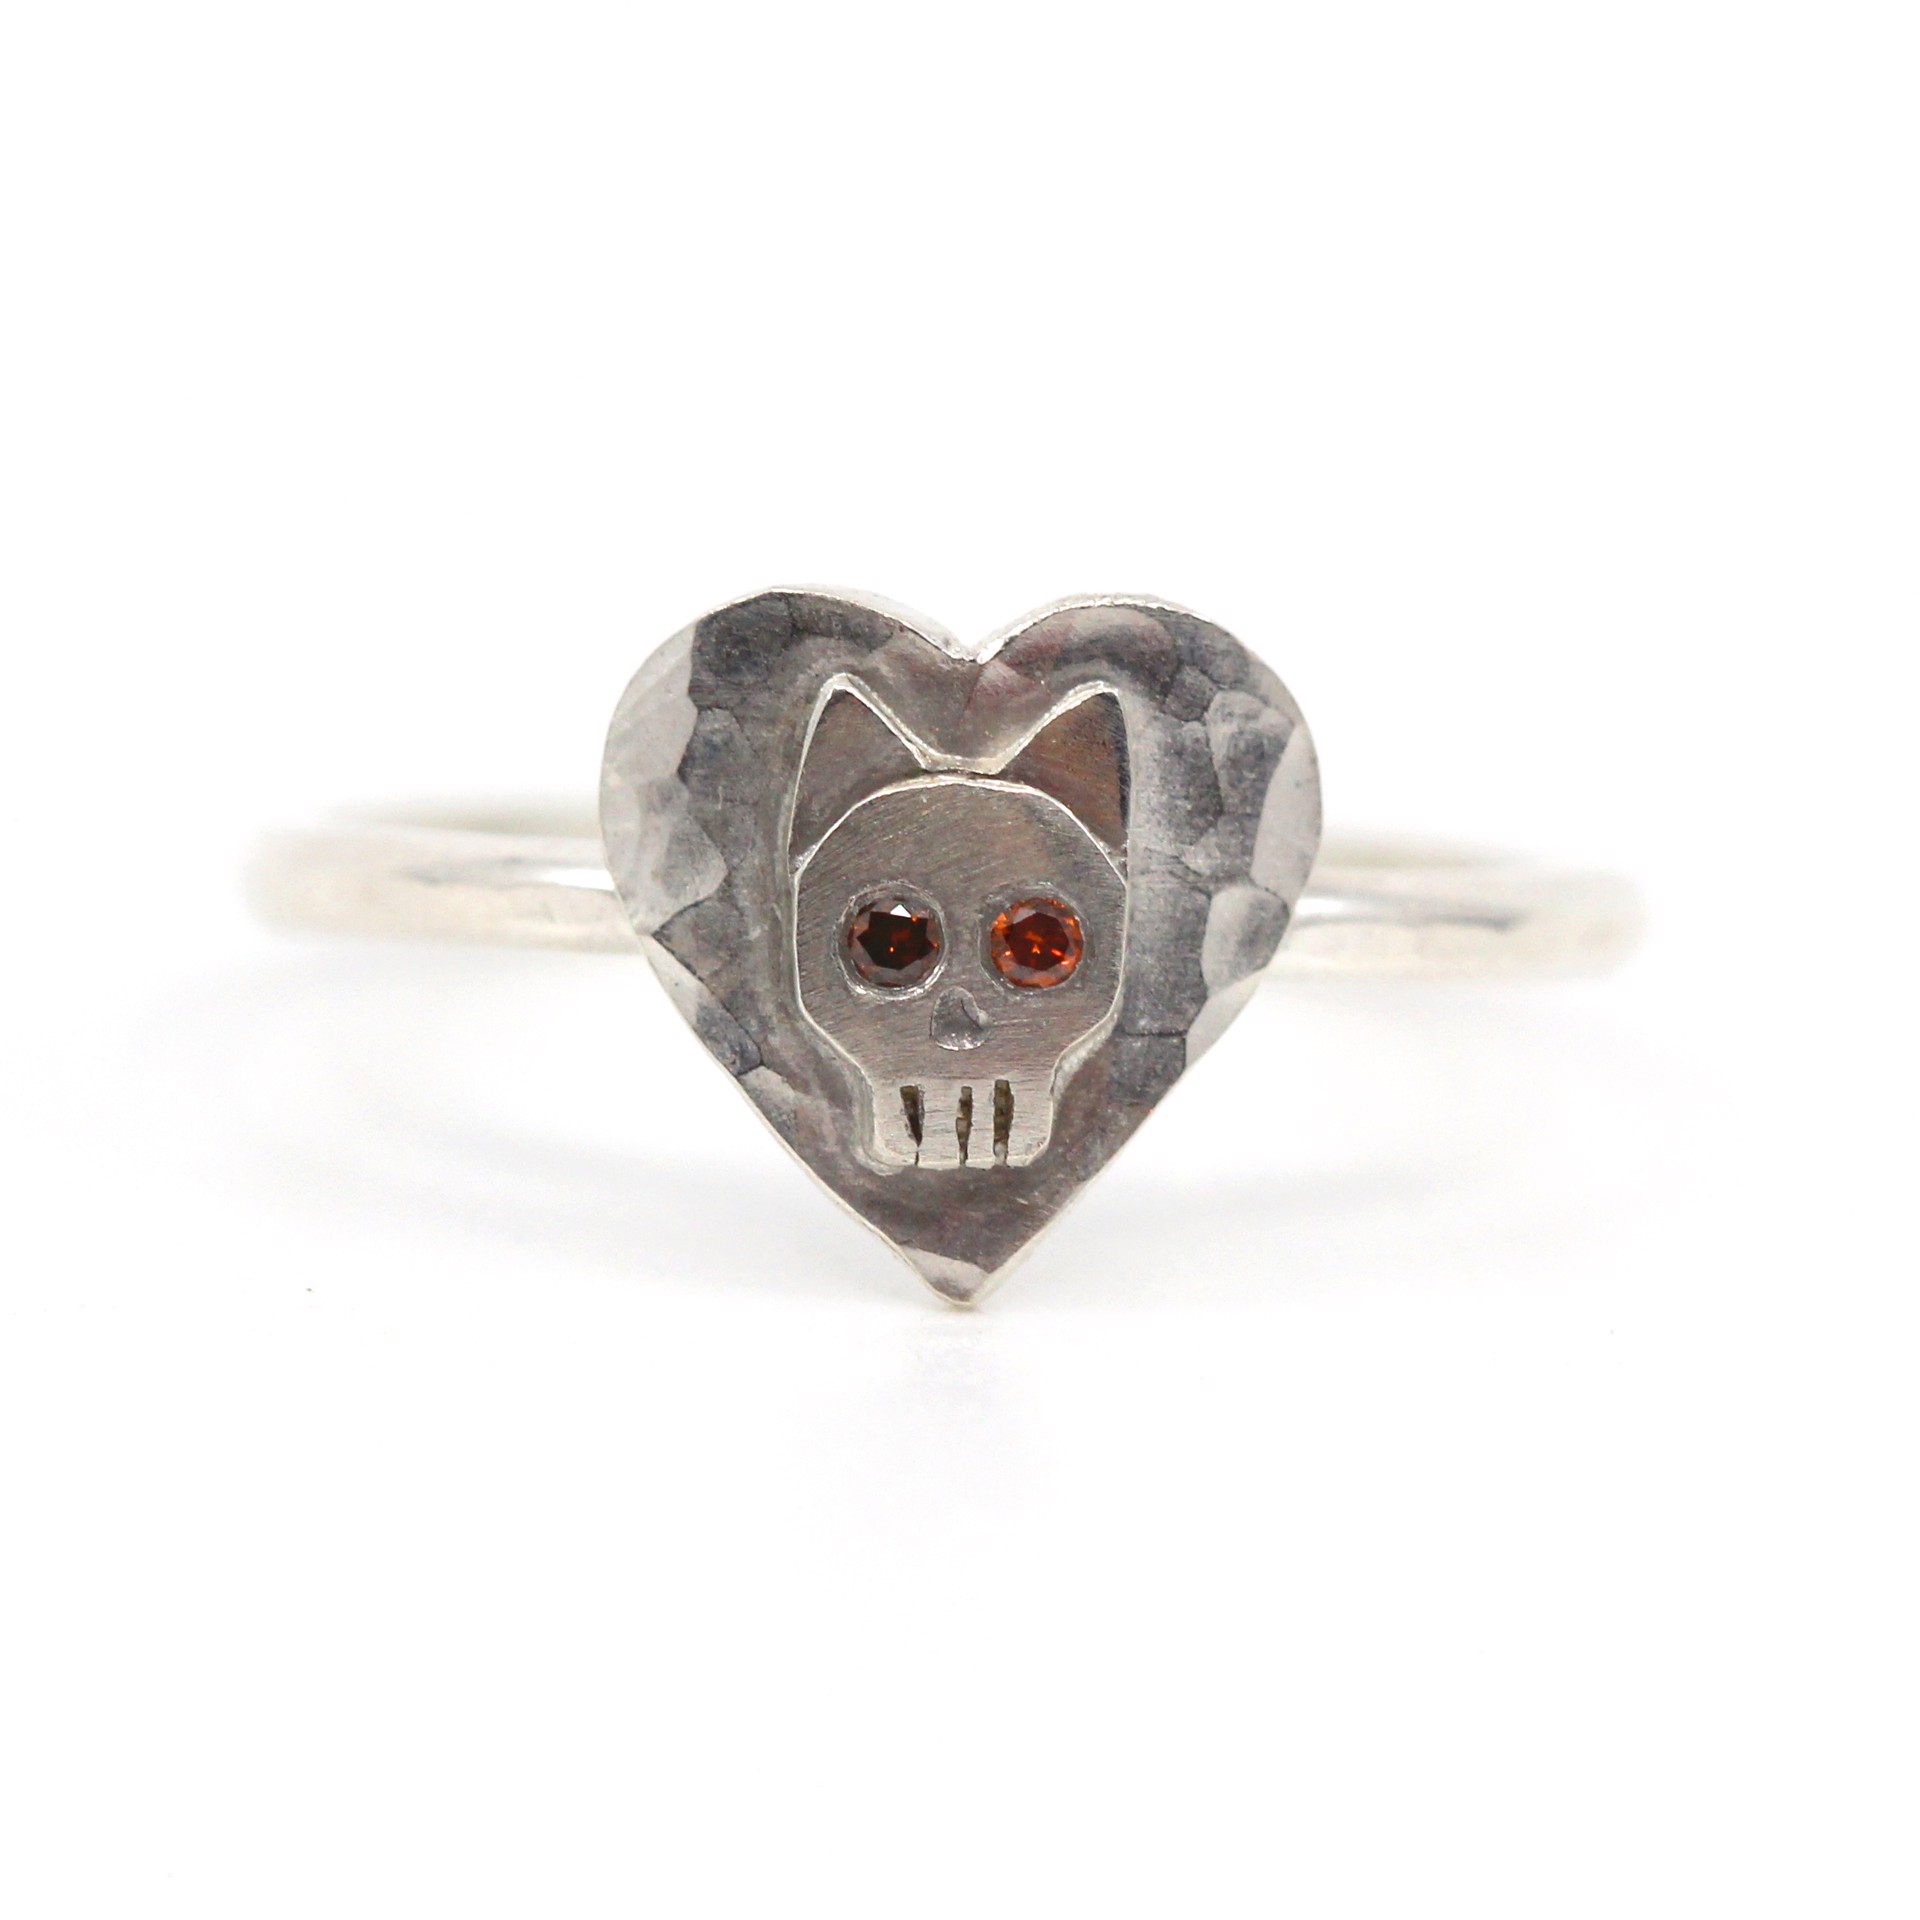 Kitty Heart Ring (Size 7) by Susan Elnora